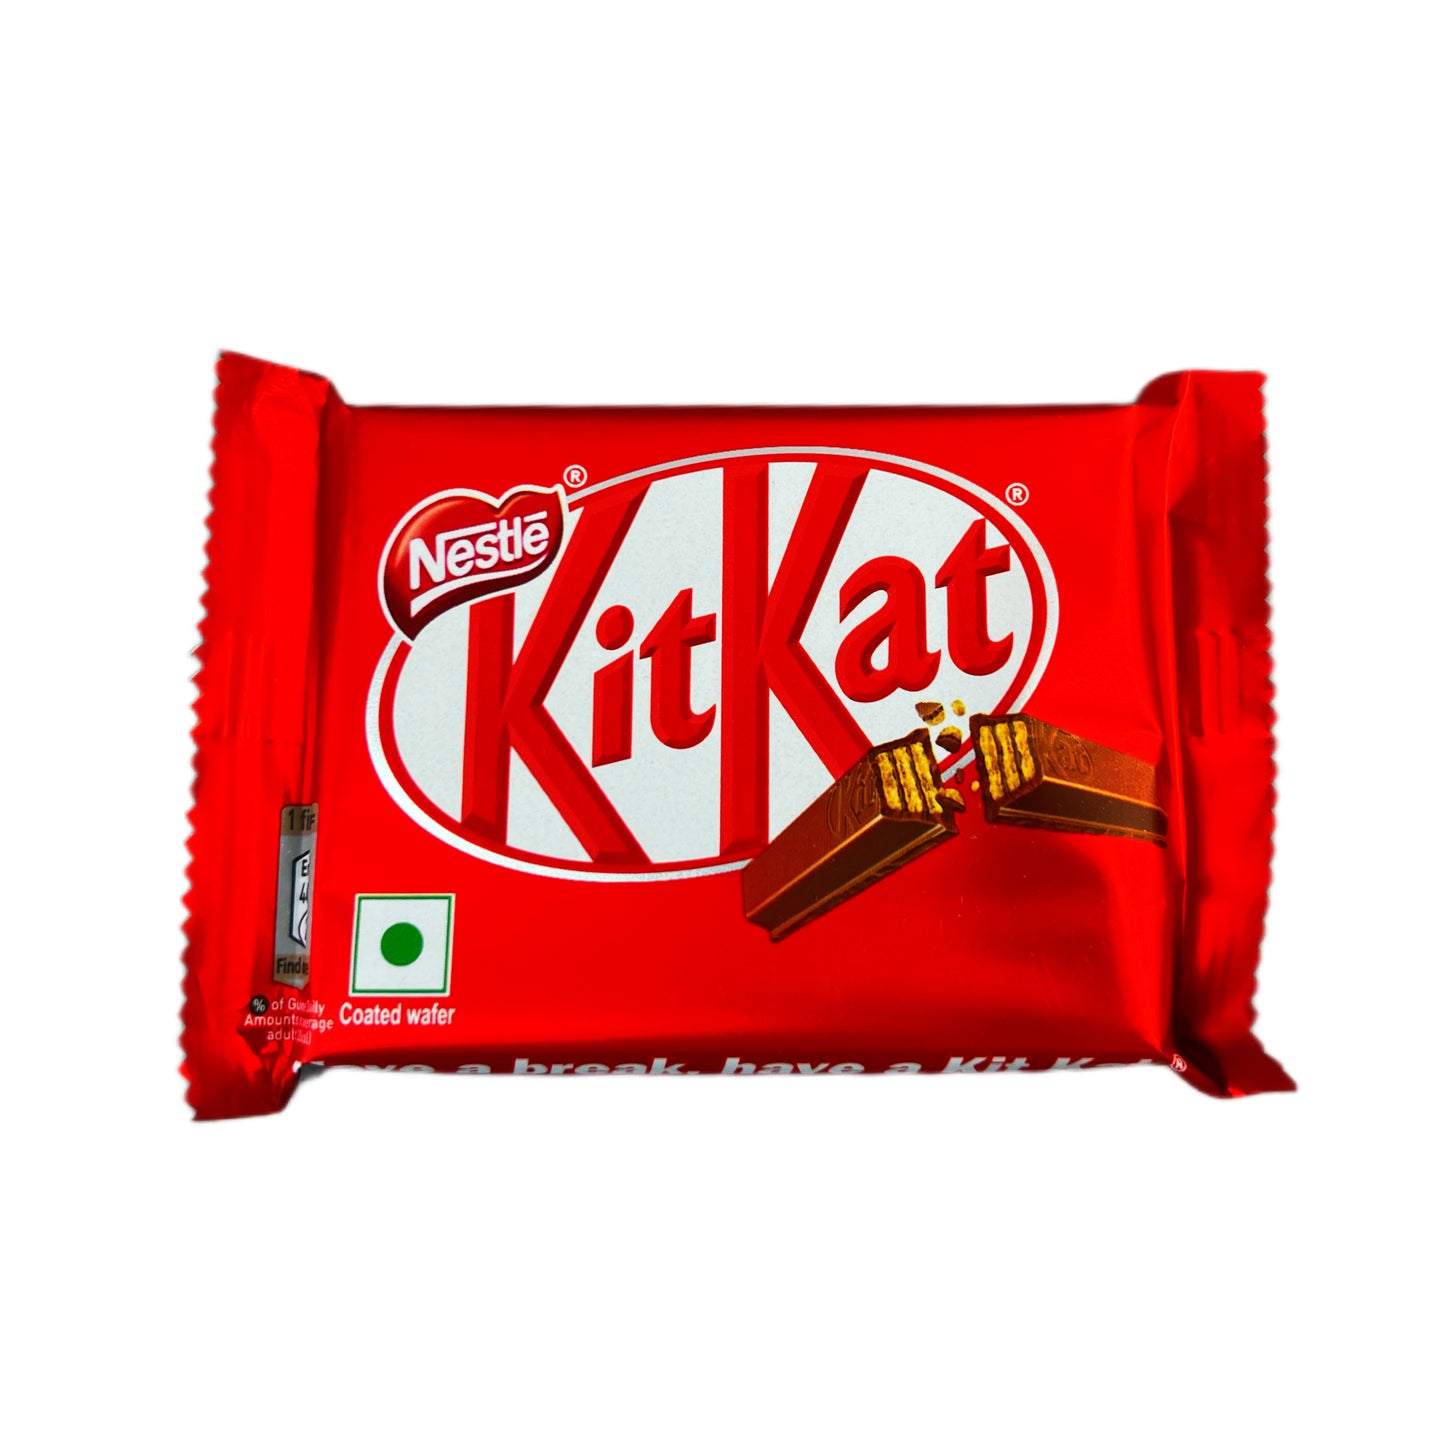 Kitkat (India) | The Snack Pause